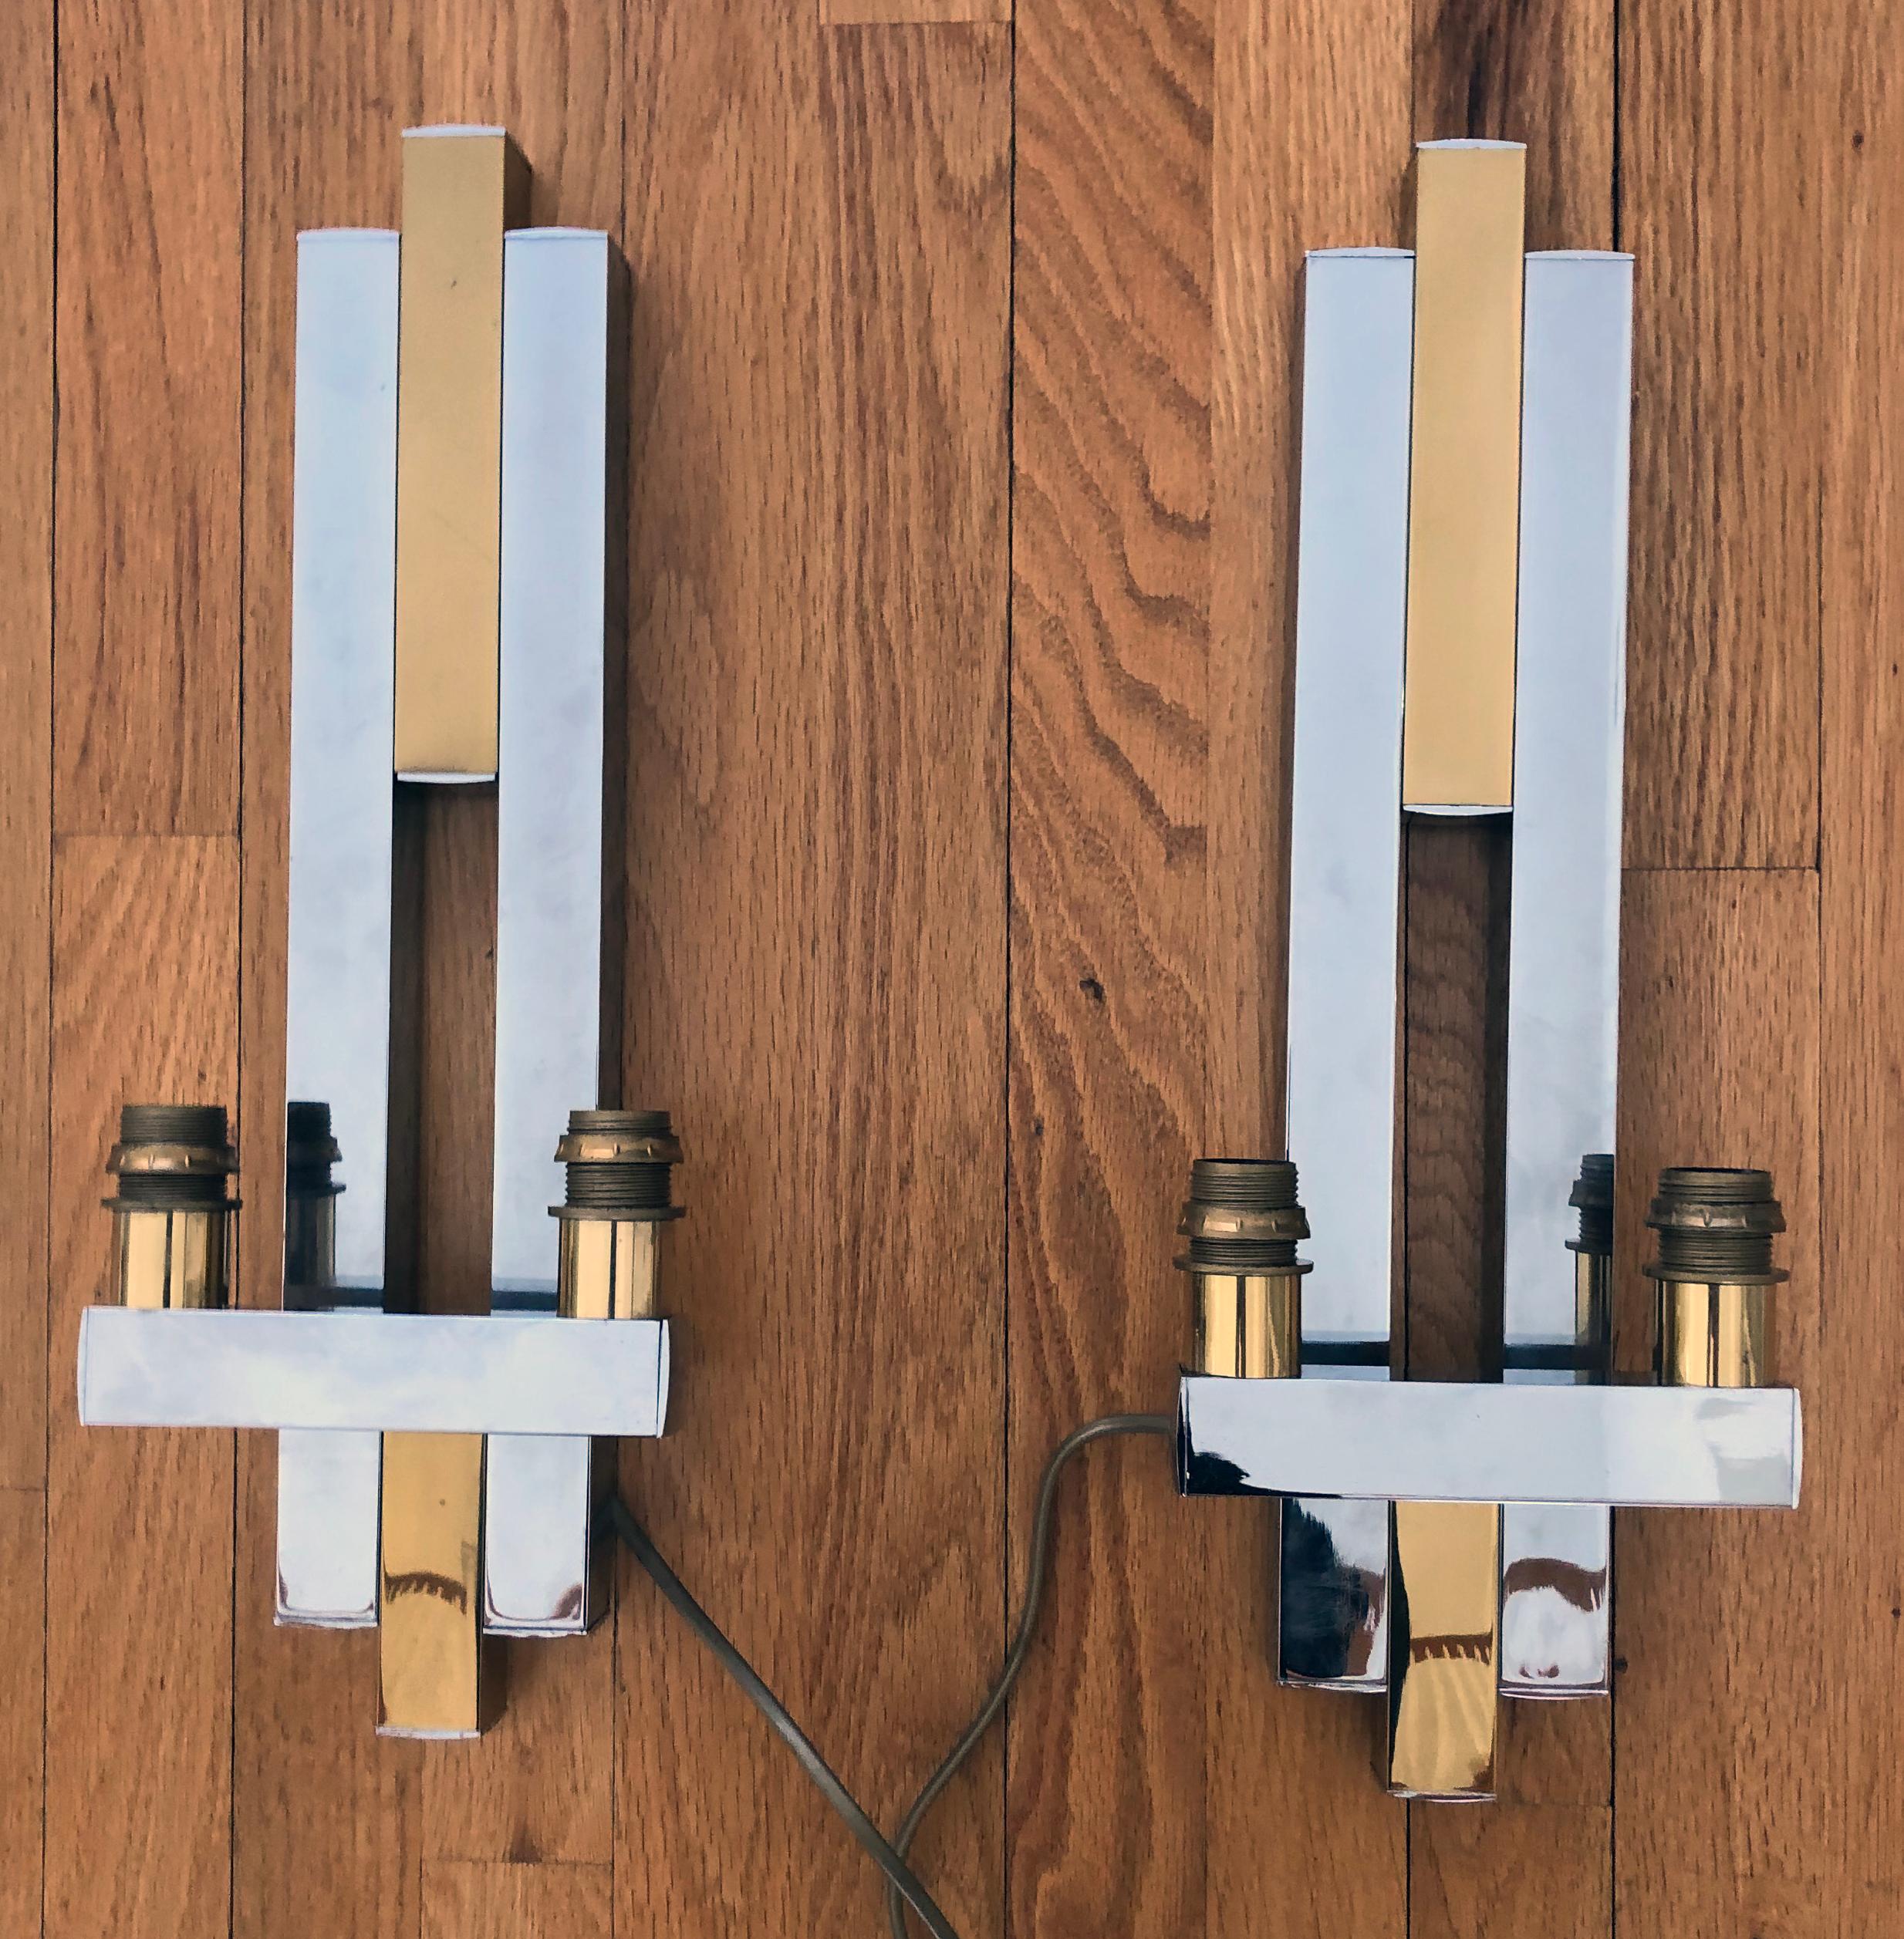 Pair of City Scape 2 light wall sconces possibly Paul Evans.
Polished nickel and brass.
Measures: Height 18.5